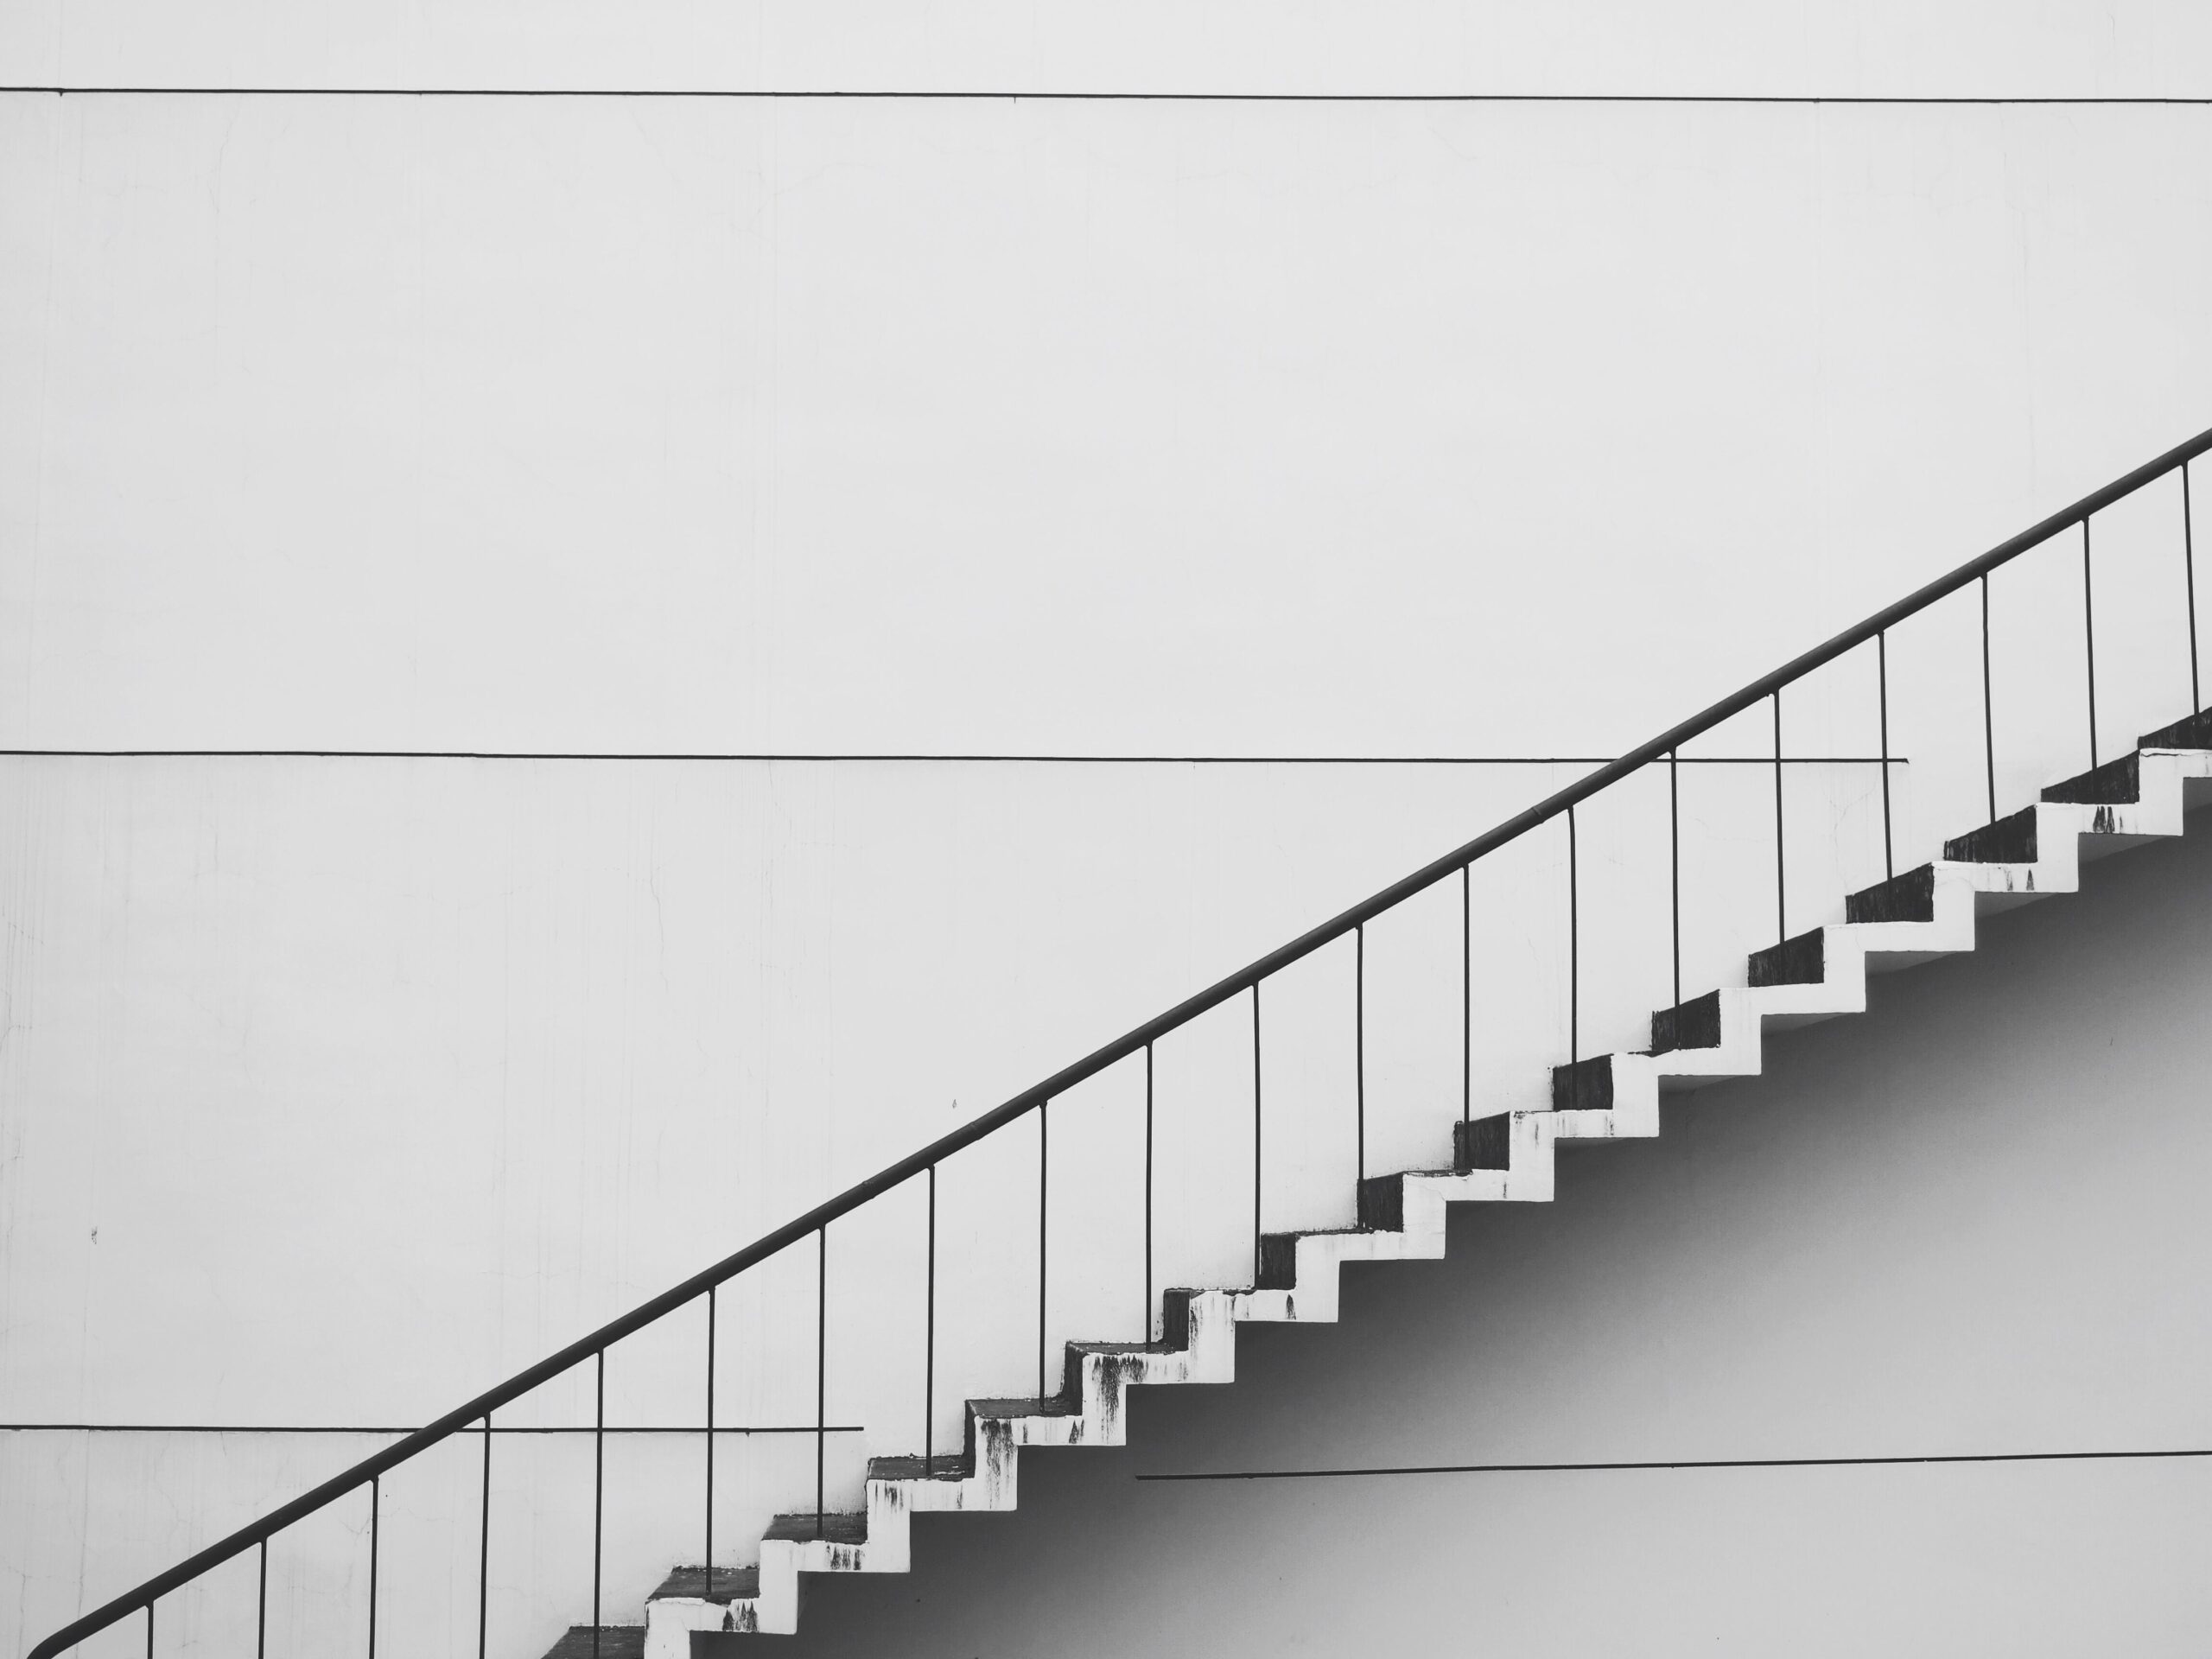 Stock image of a staircase - Start your search on Share to Buy today!